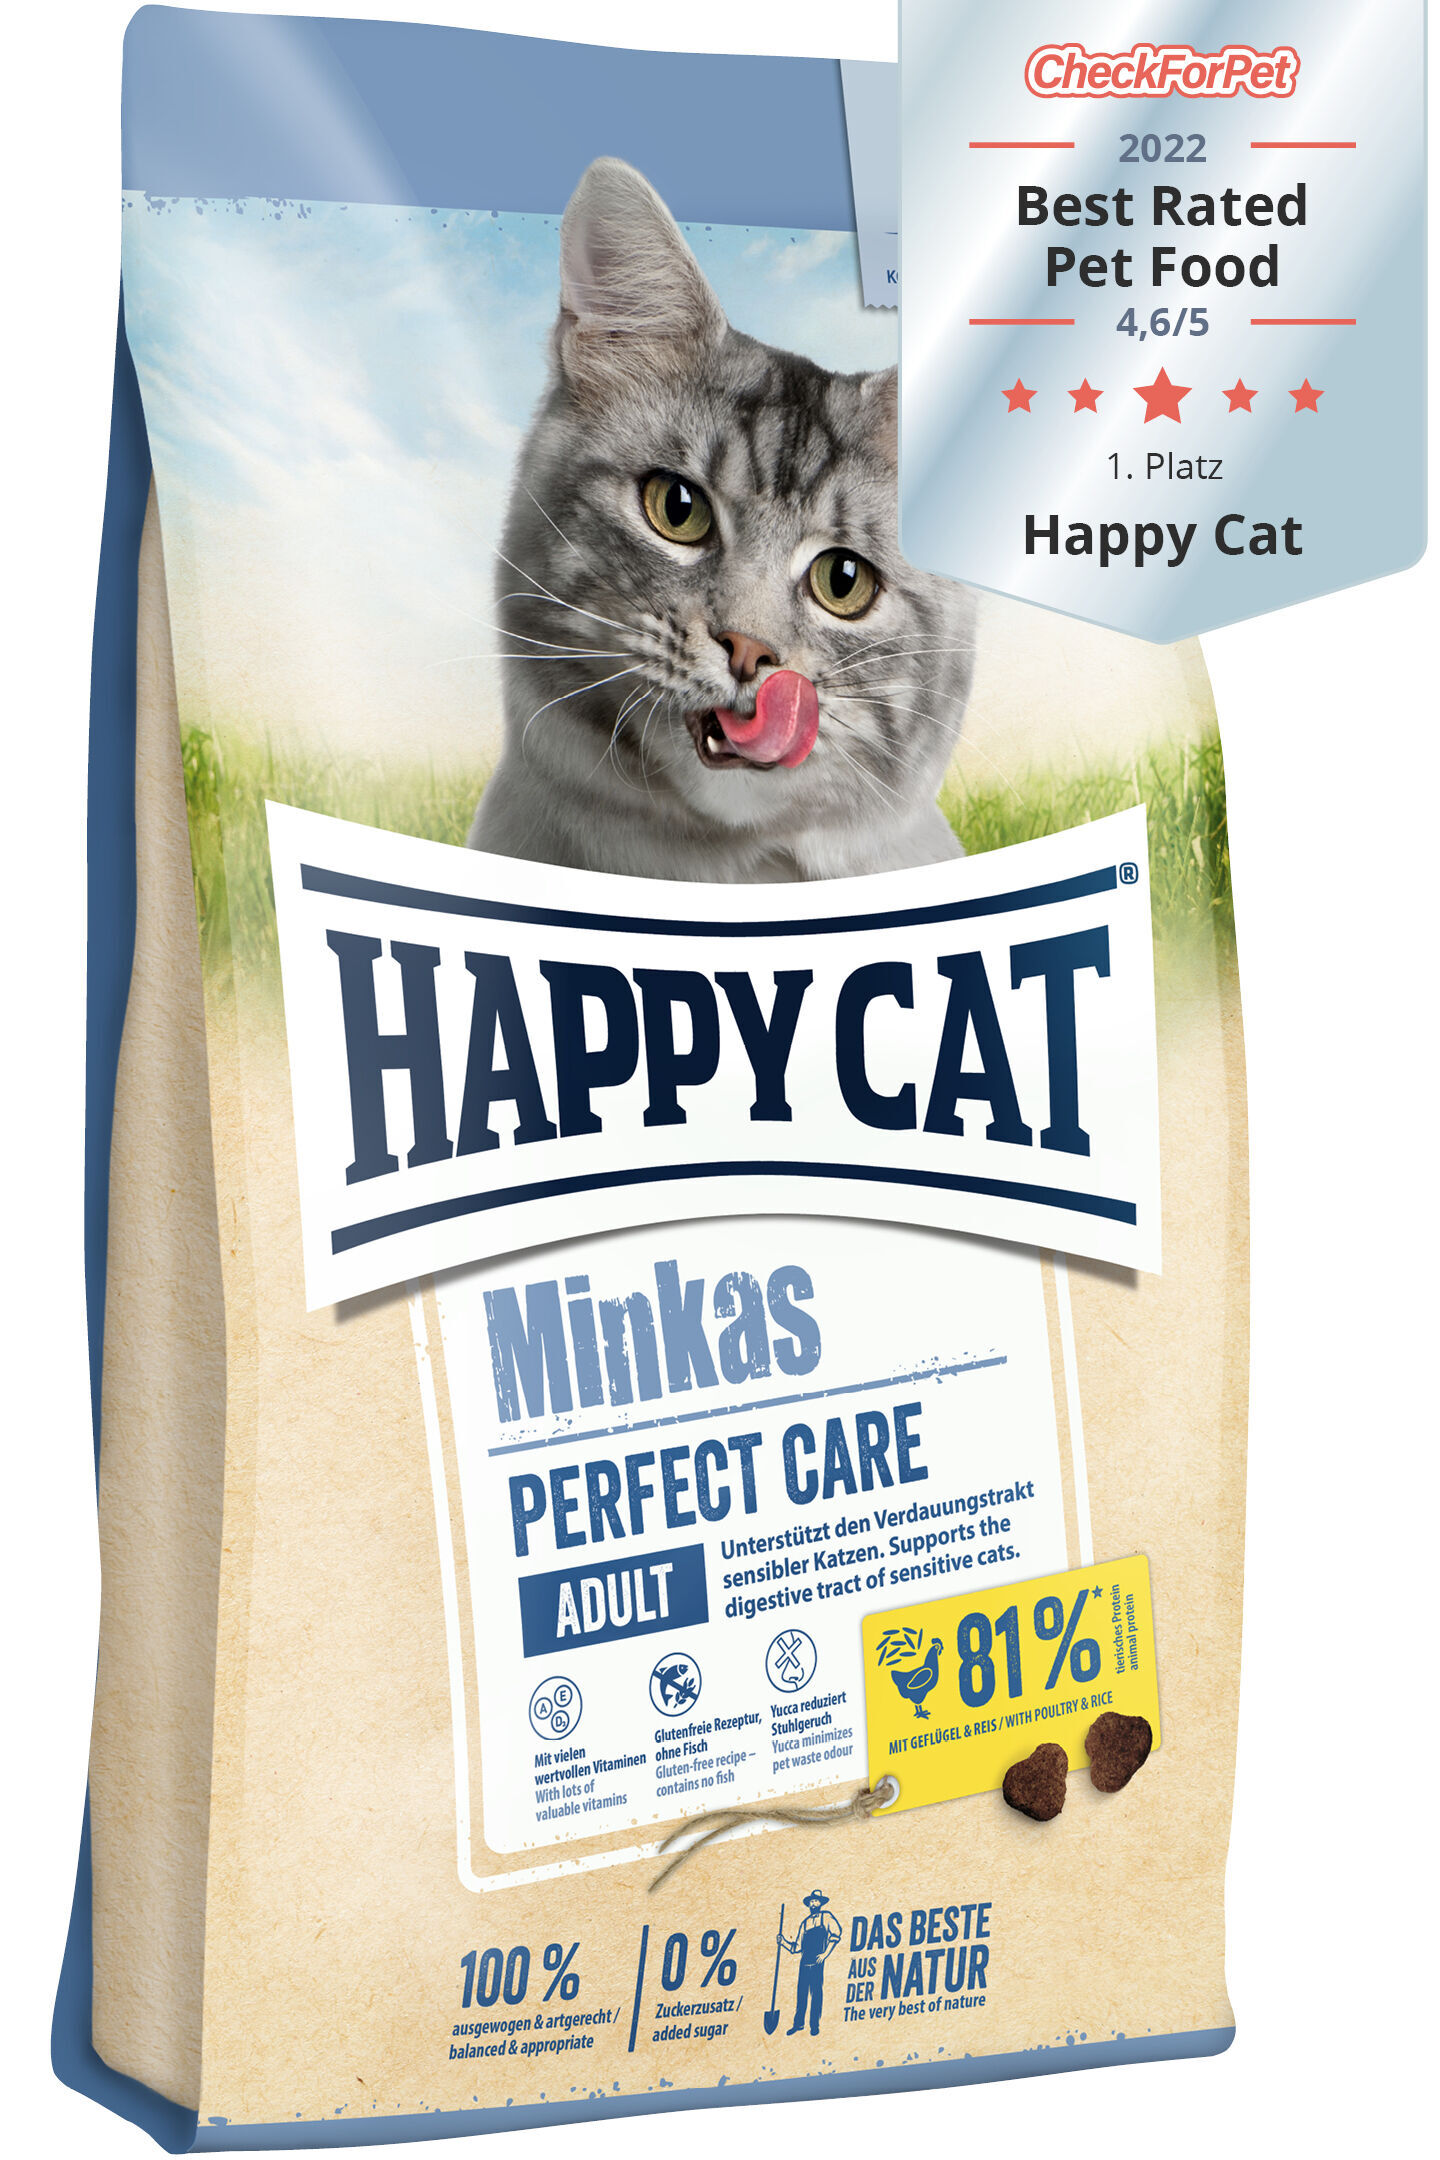 Minkas Perfect Care Poultry & Rice